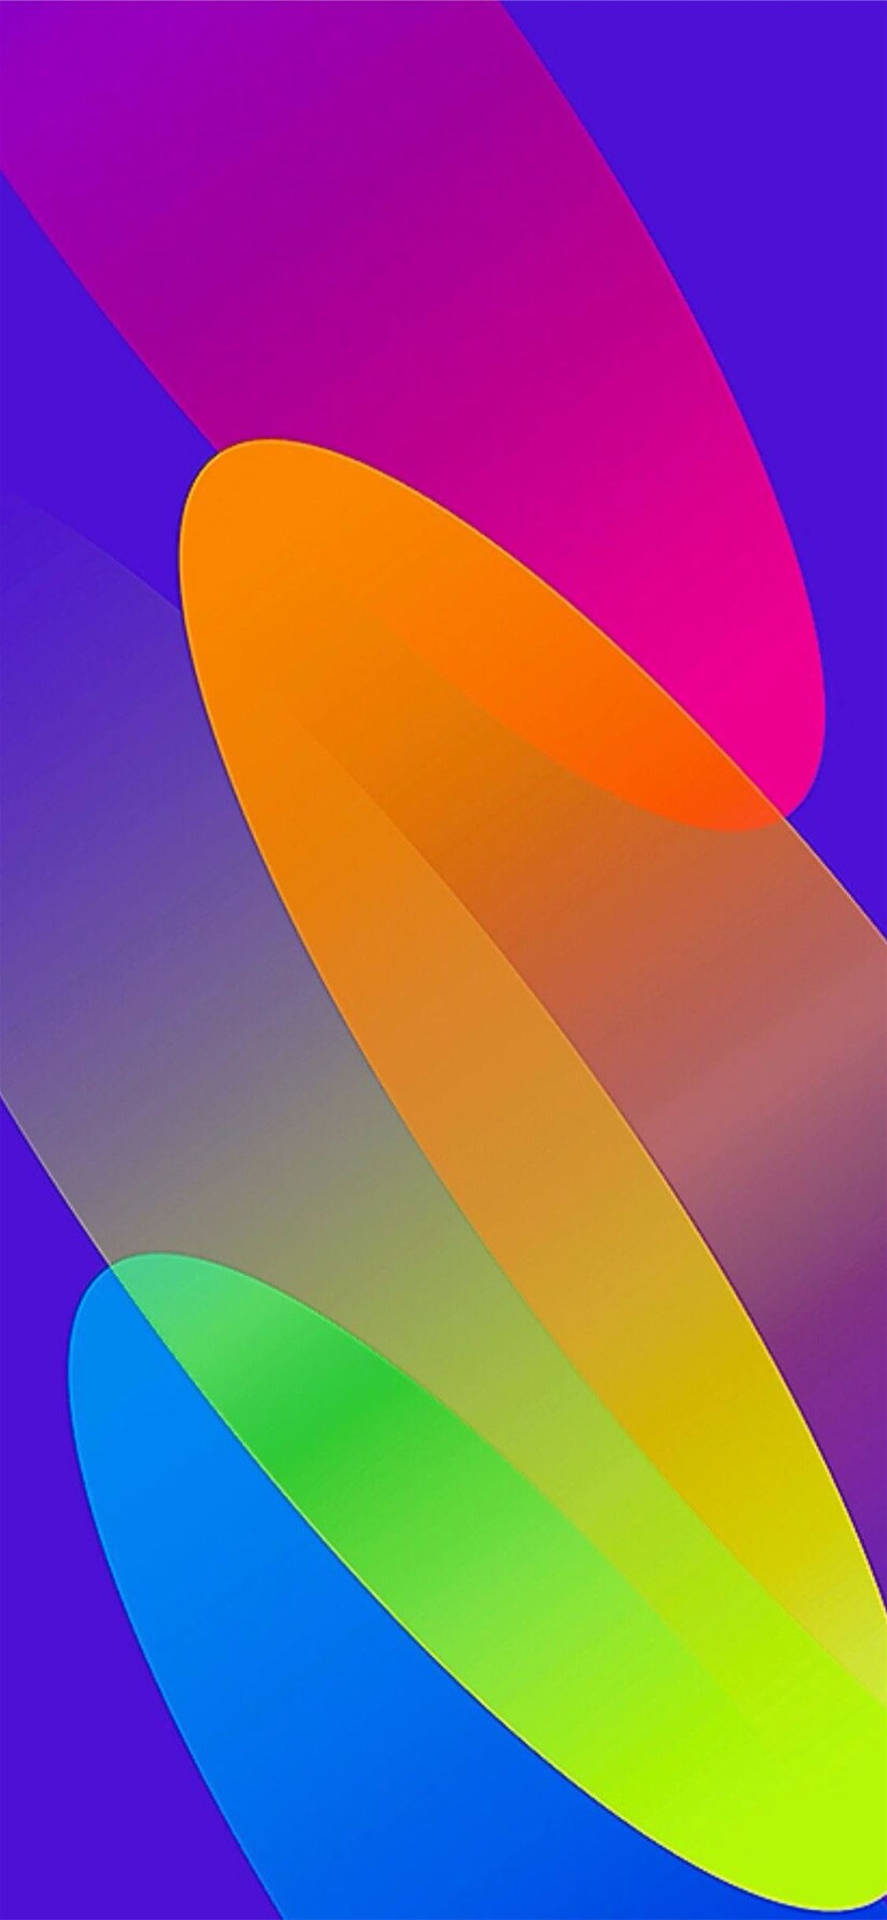 Samsung Galaxy 4k Colorful Abstract Swirly Designs Background